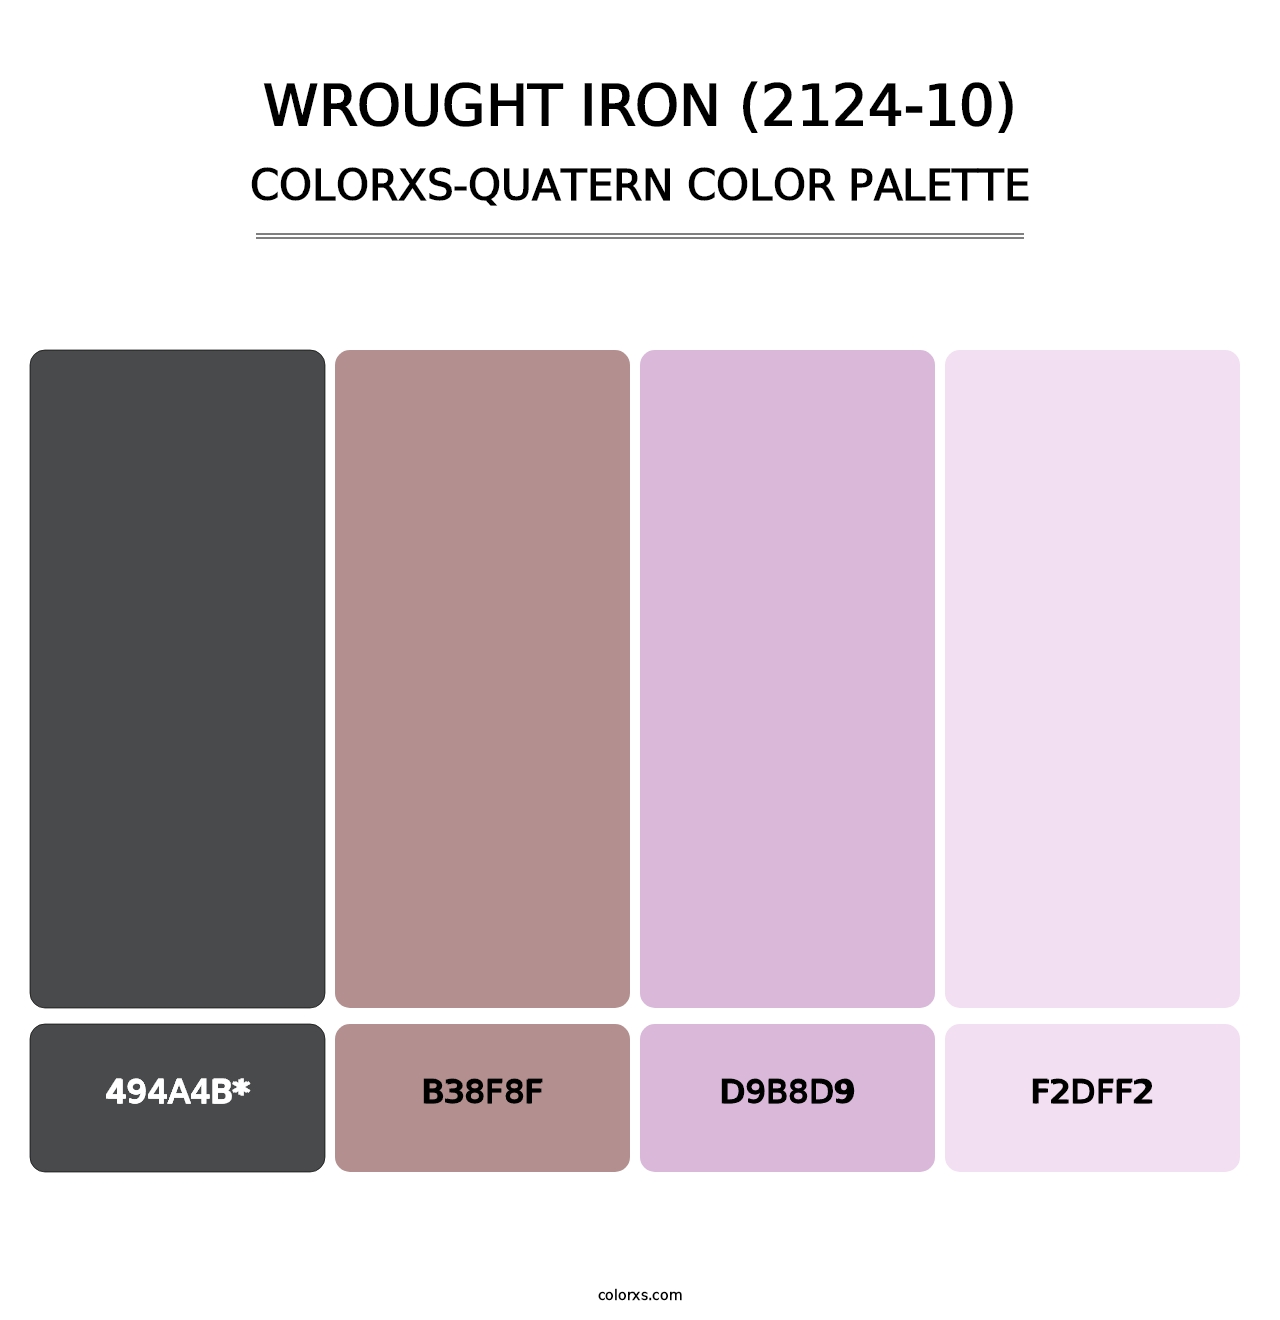 Wrought Iron (2124-10) - Colorxs Quatern Palette